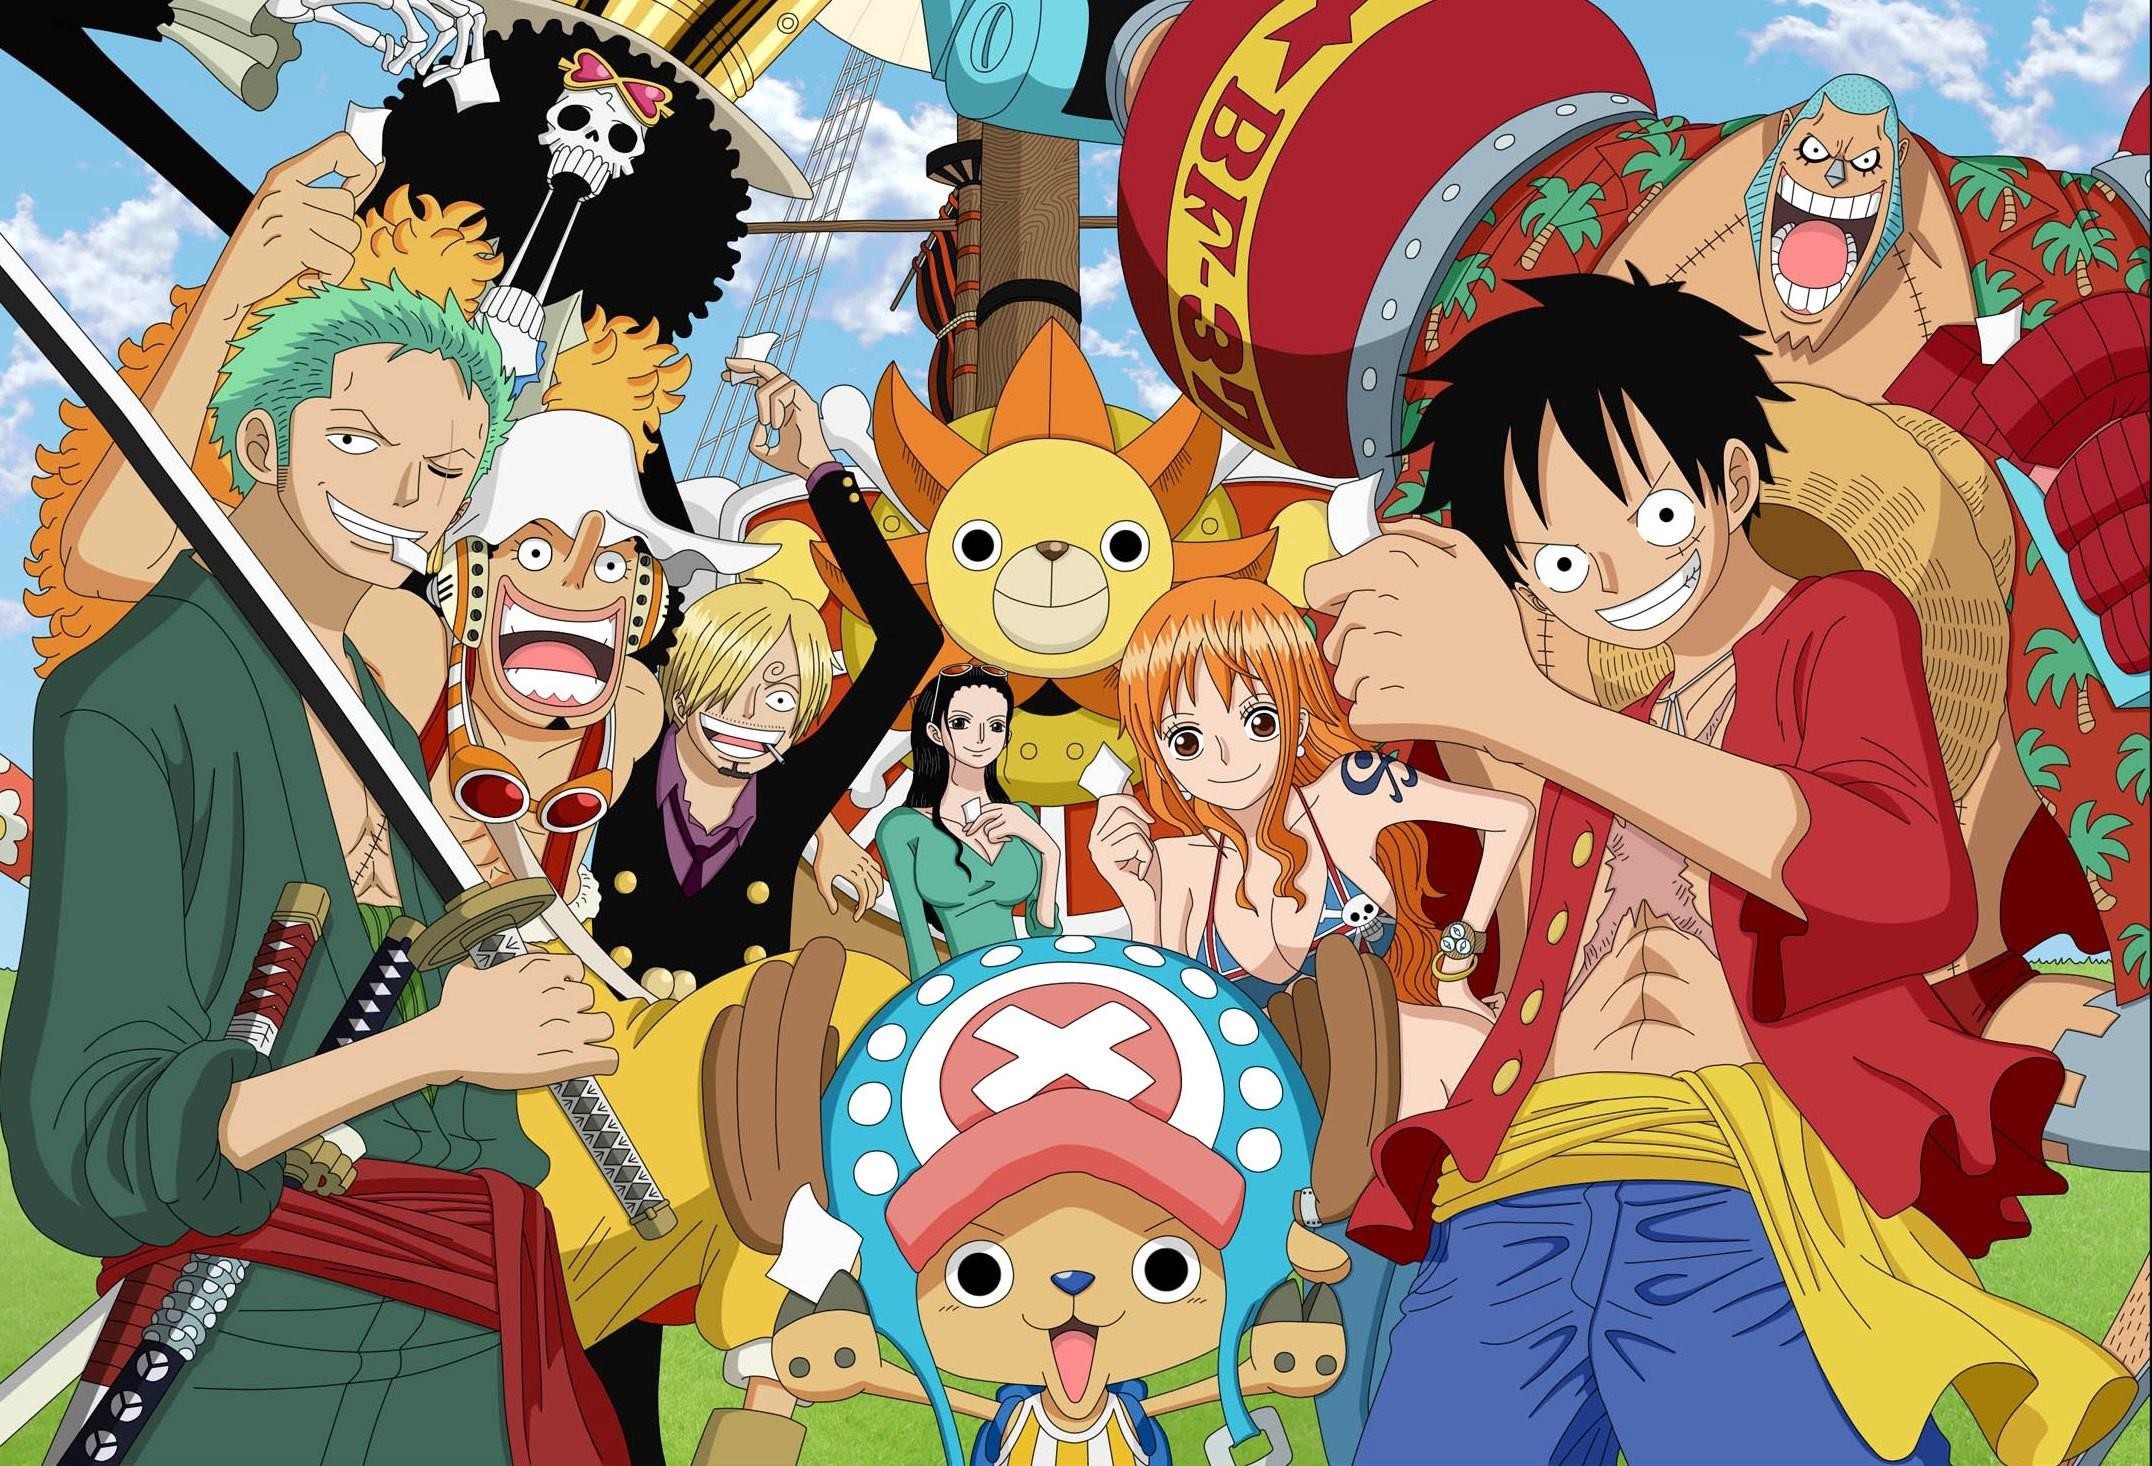 2152x1466 one piece wallpaper hd free download 4k high definition windows 10 mac  apple colourful images backgrounds download wallpaper free 2152Ã1466  Wallpaper HD